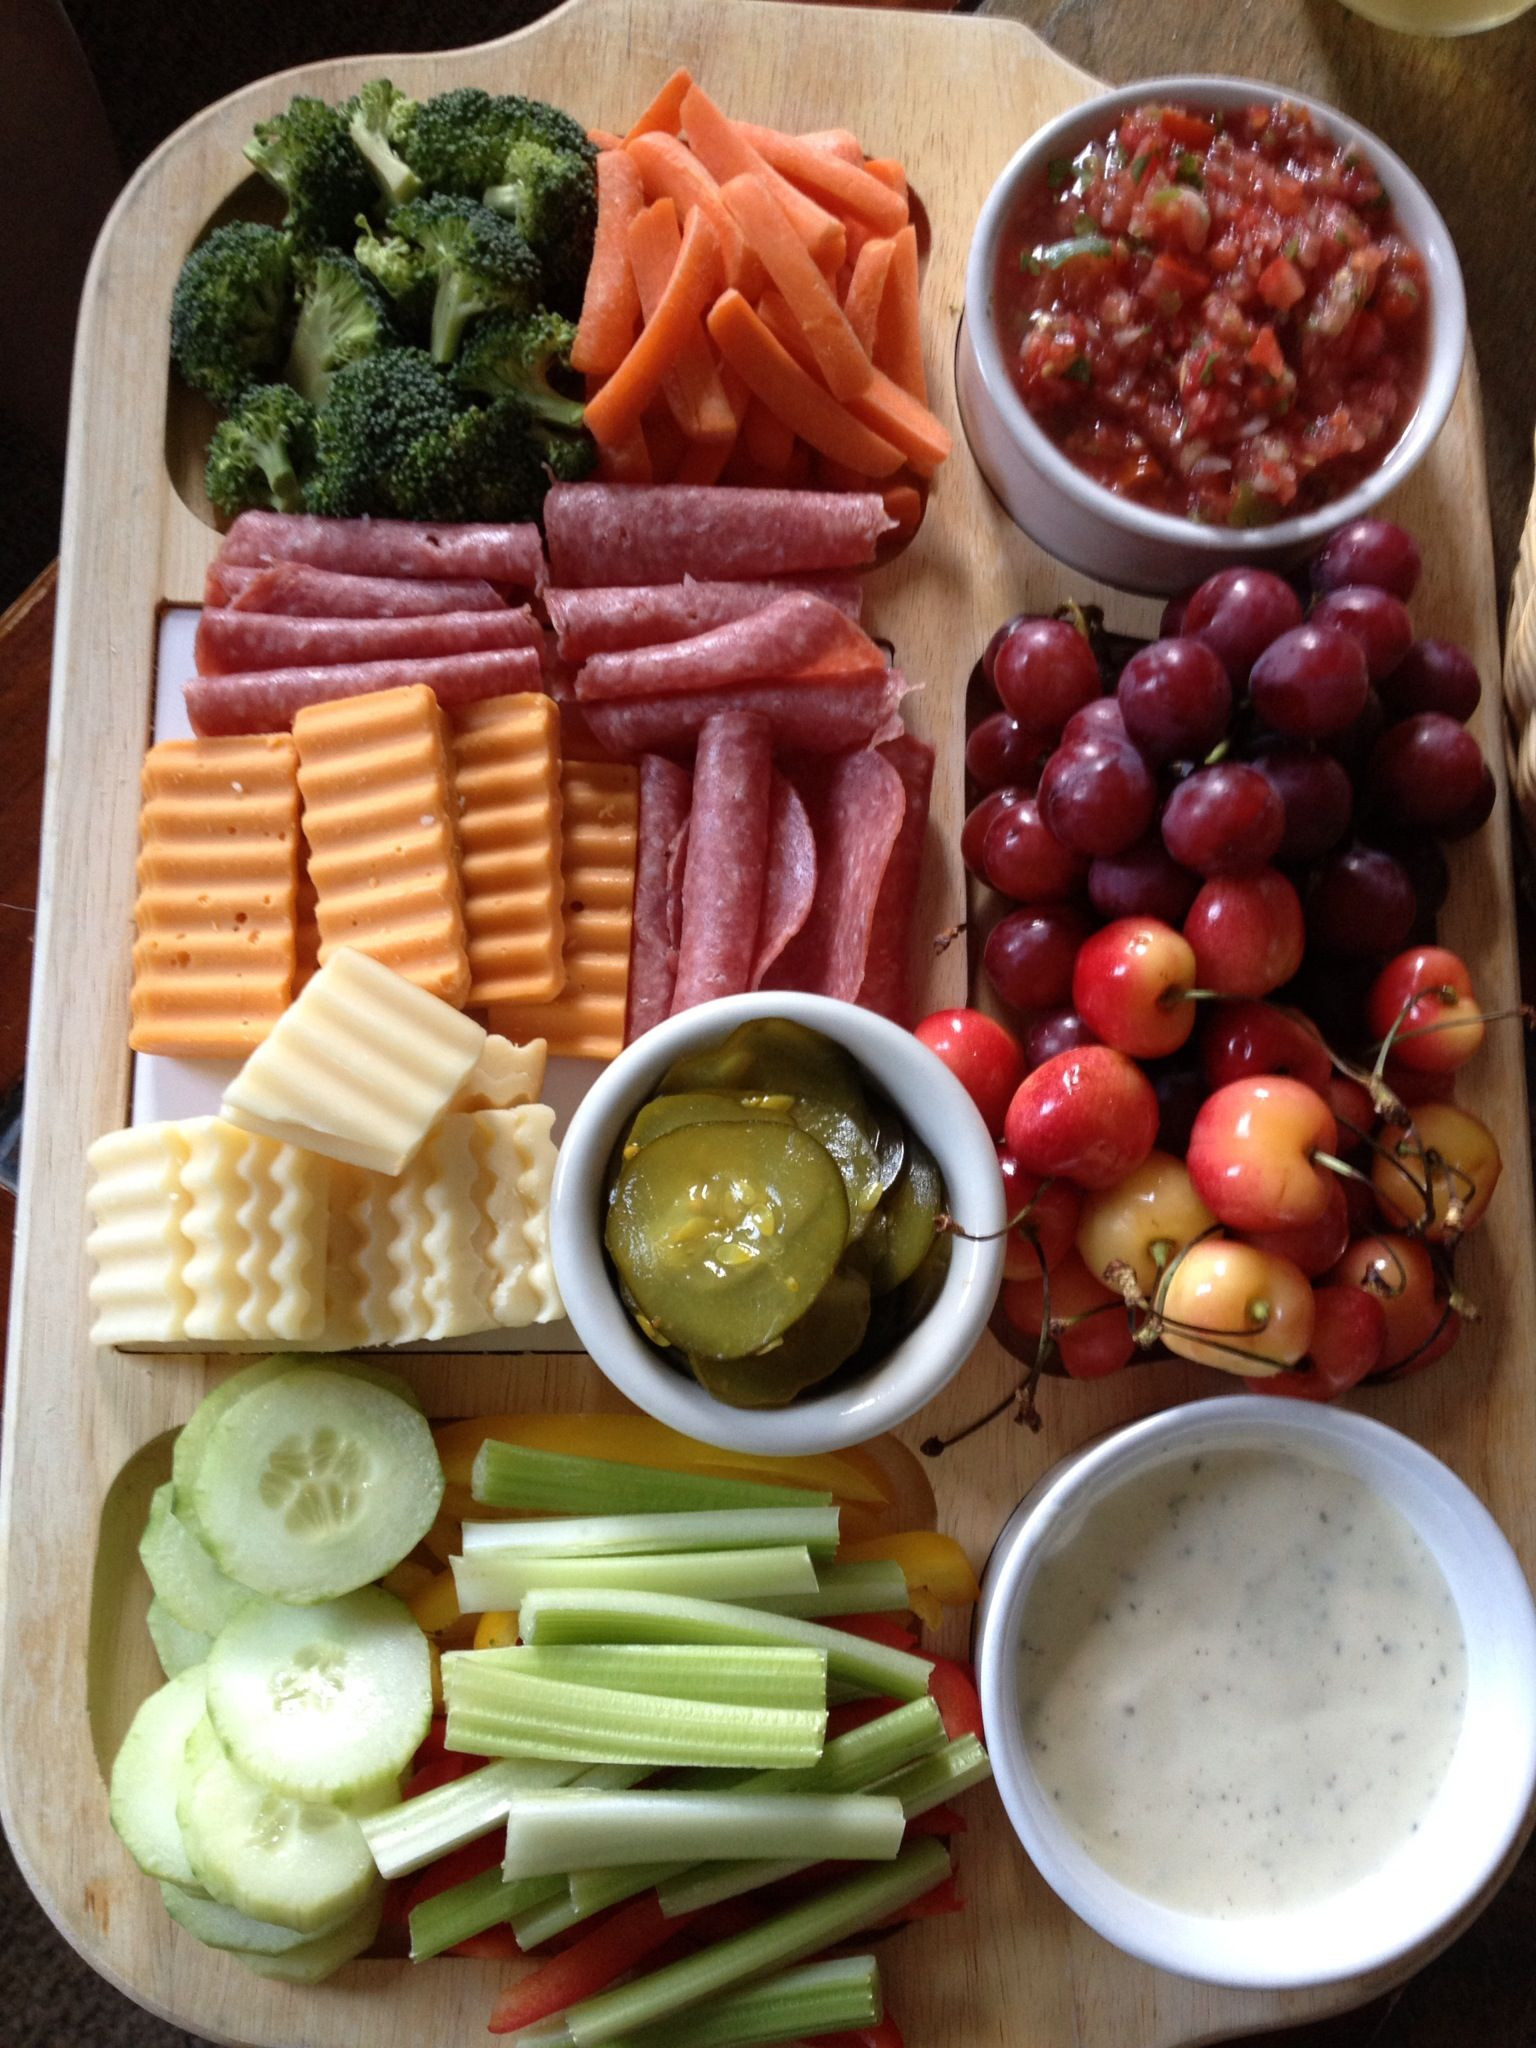 Healthy Snacks To Have At Home
 At home movie snacks with a glass of wine